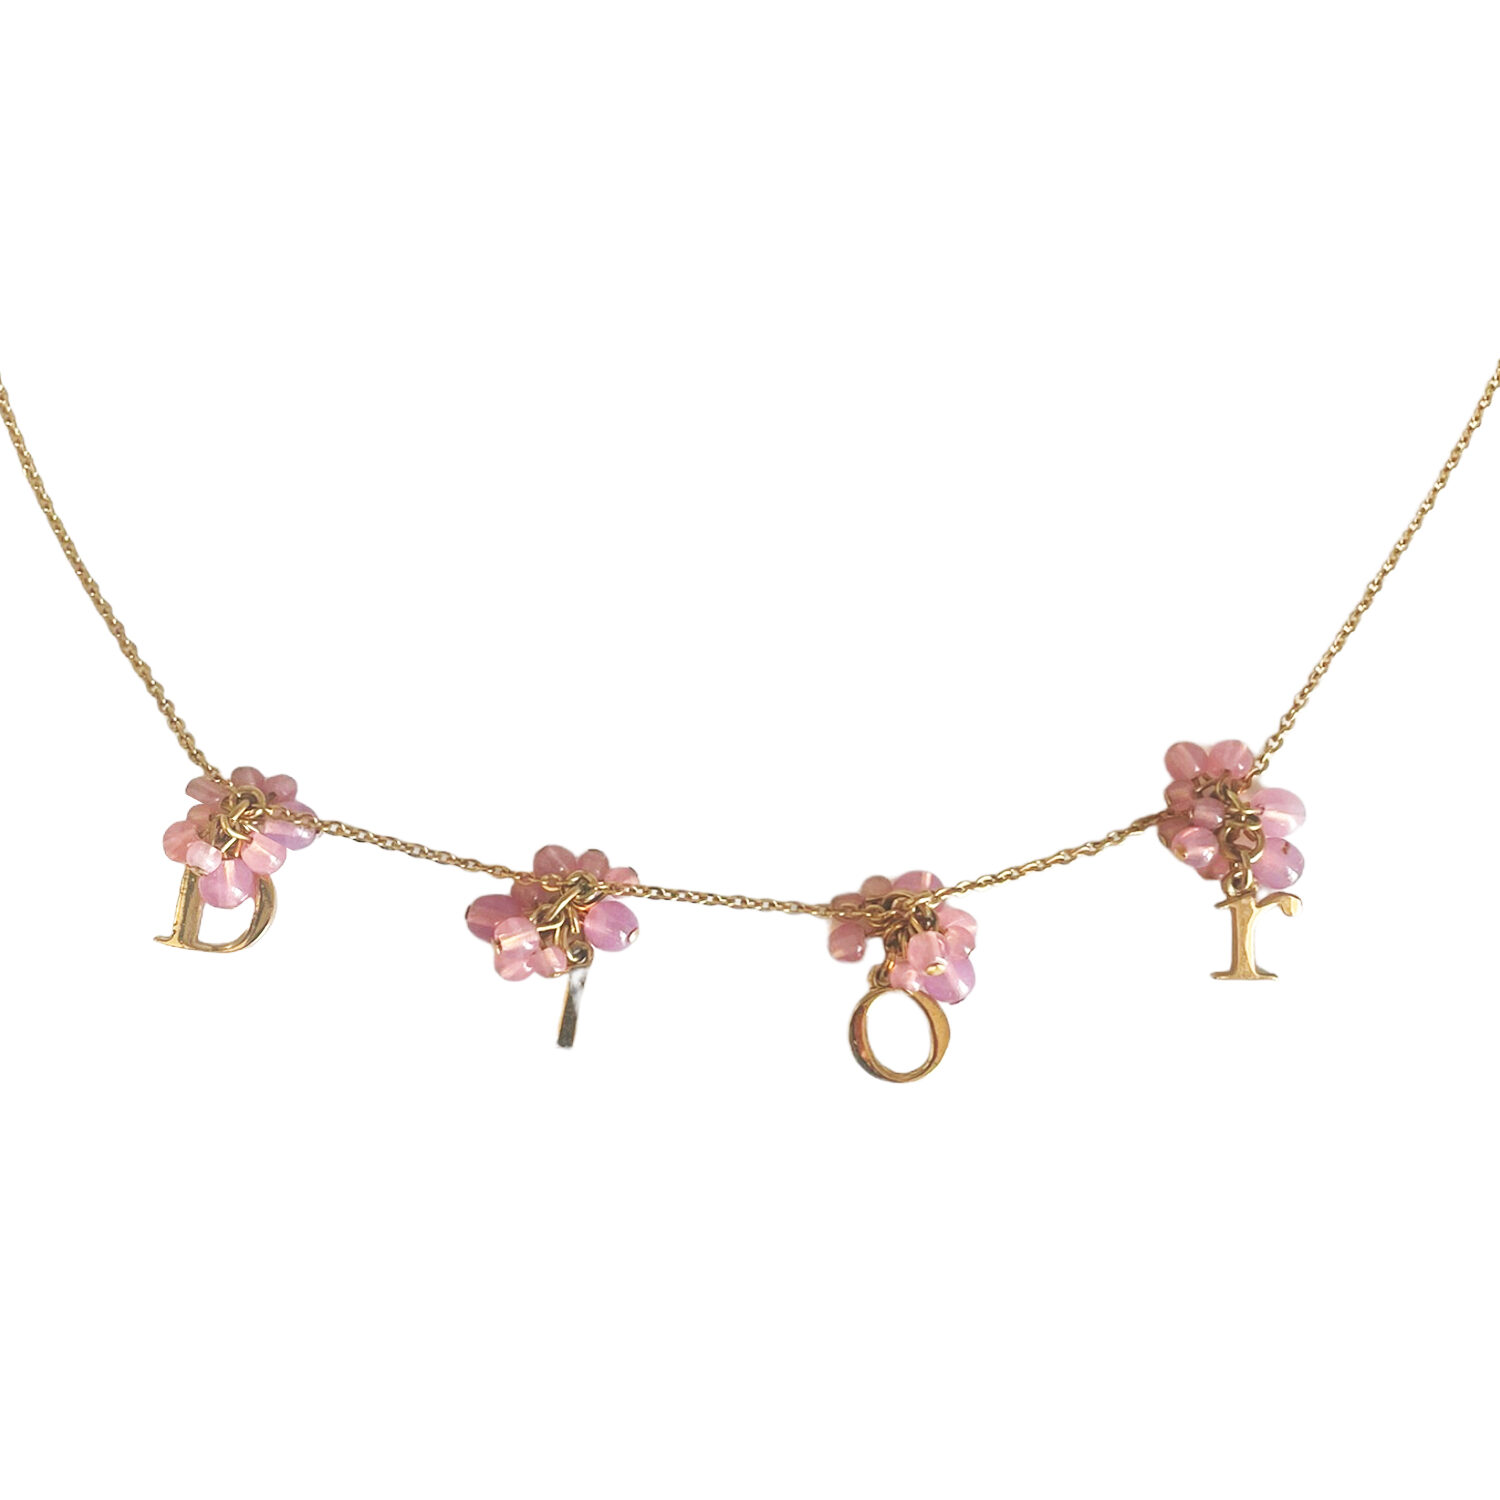 Vintage Dior Spellout Logo Beaded Necklace in Gold / Pink | NITRYL